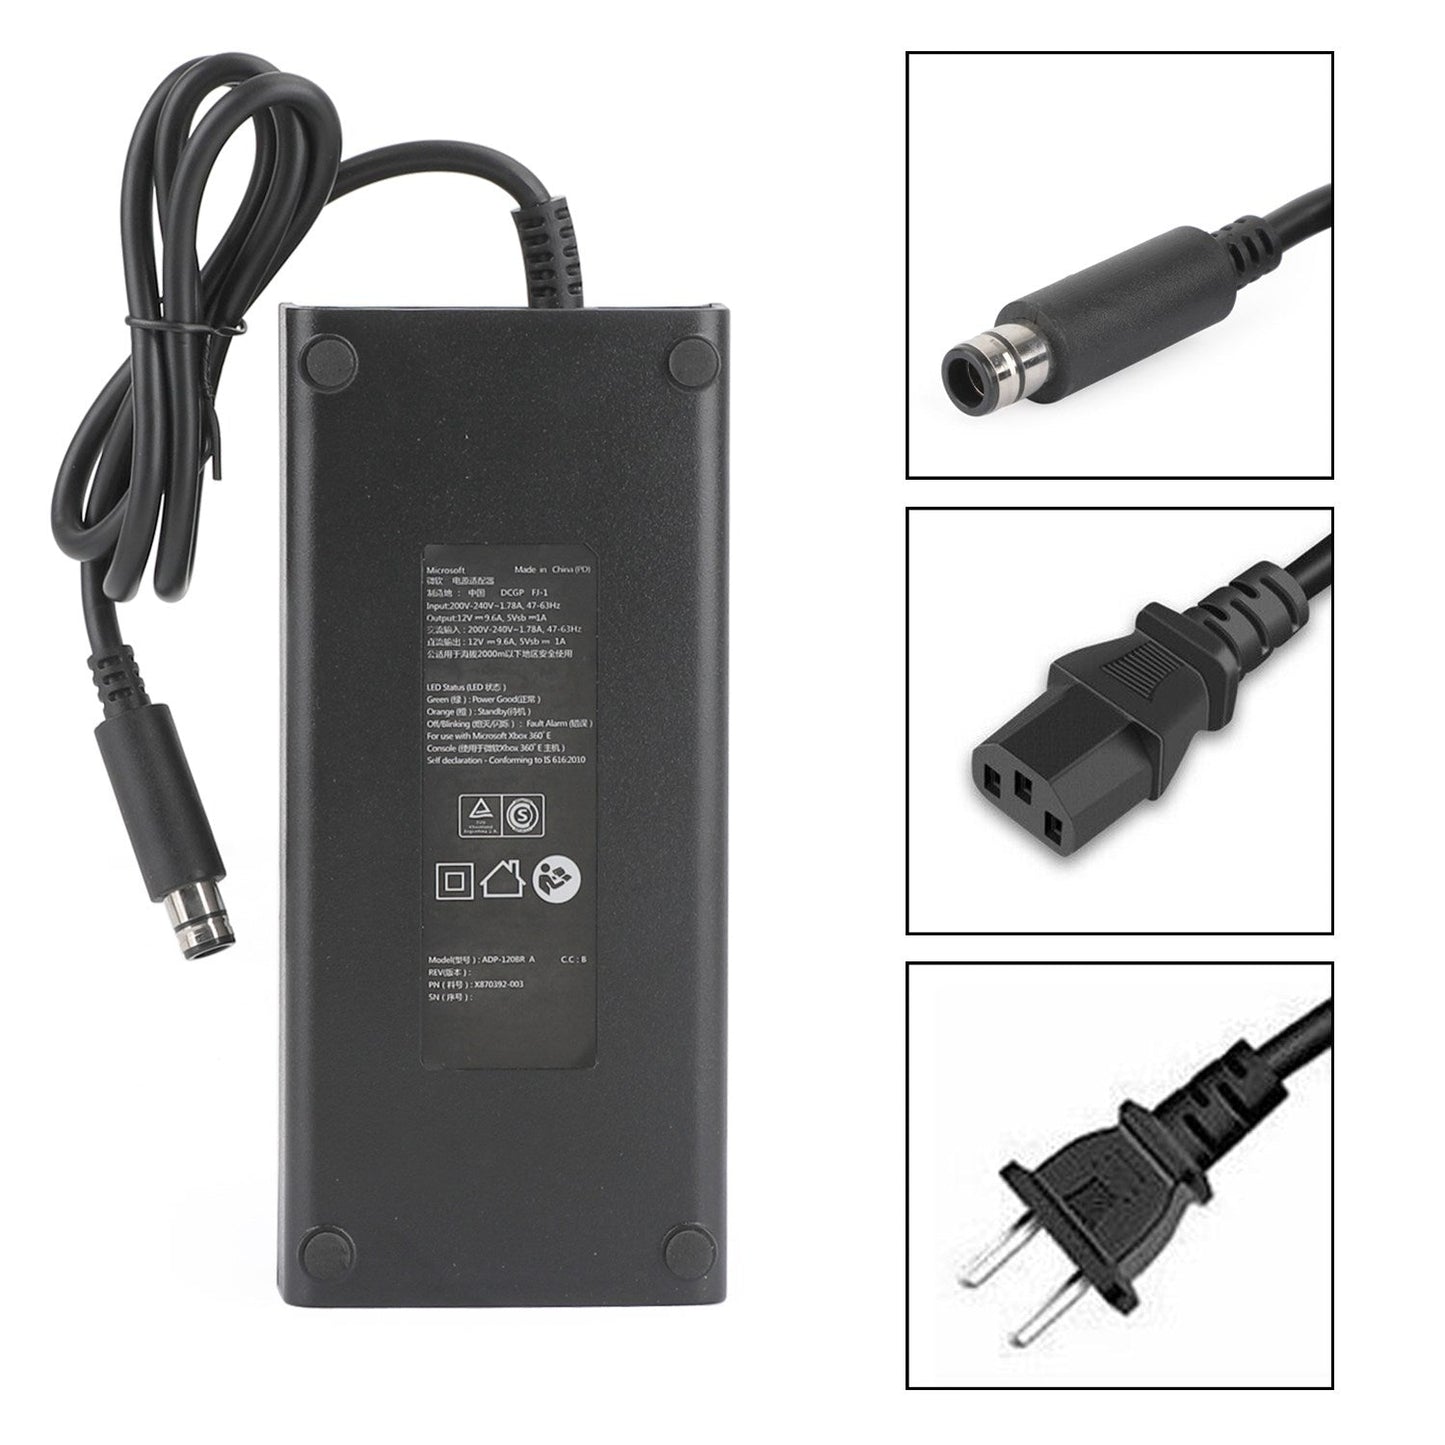 AC Adapter Brick Charger Power Supply Cord 115W Fit for Xbox 360 E US Plug